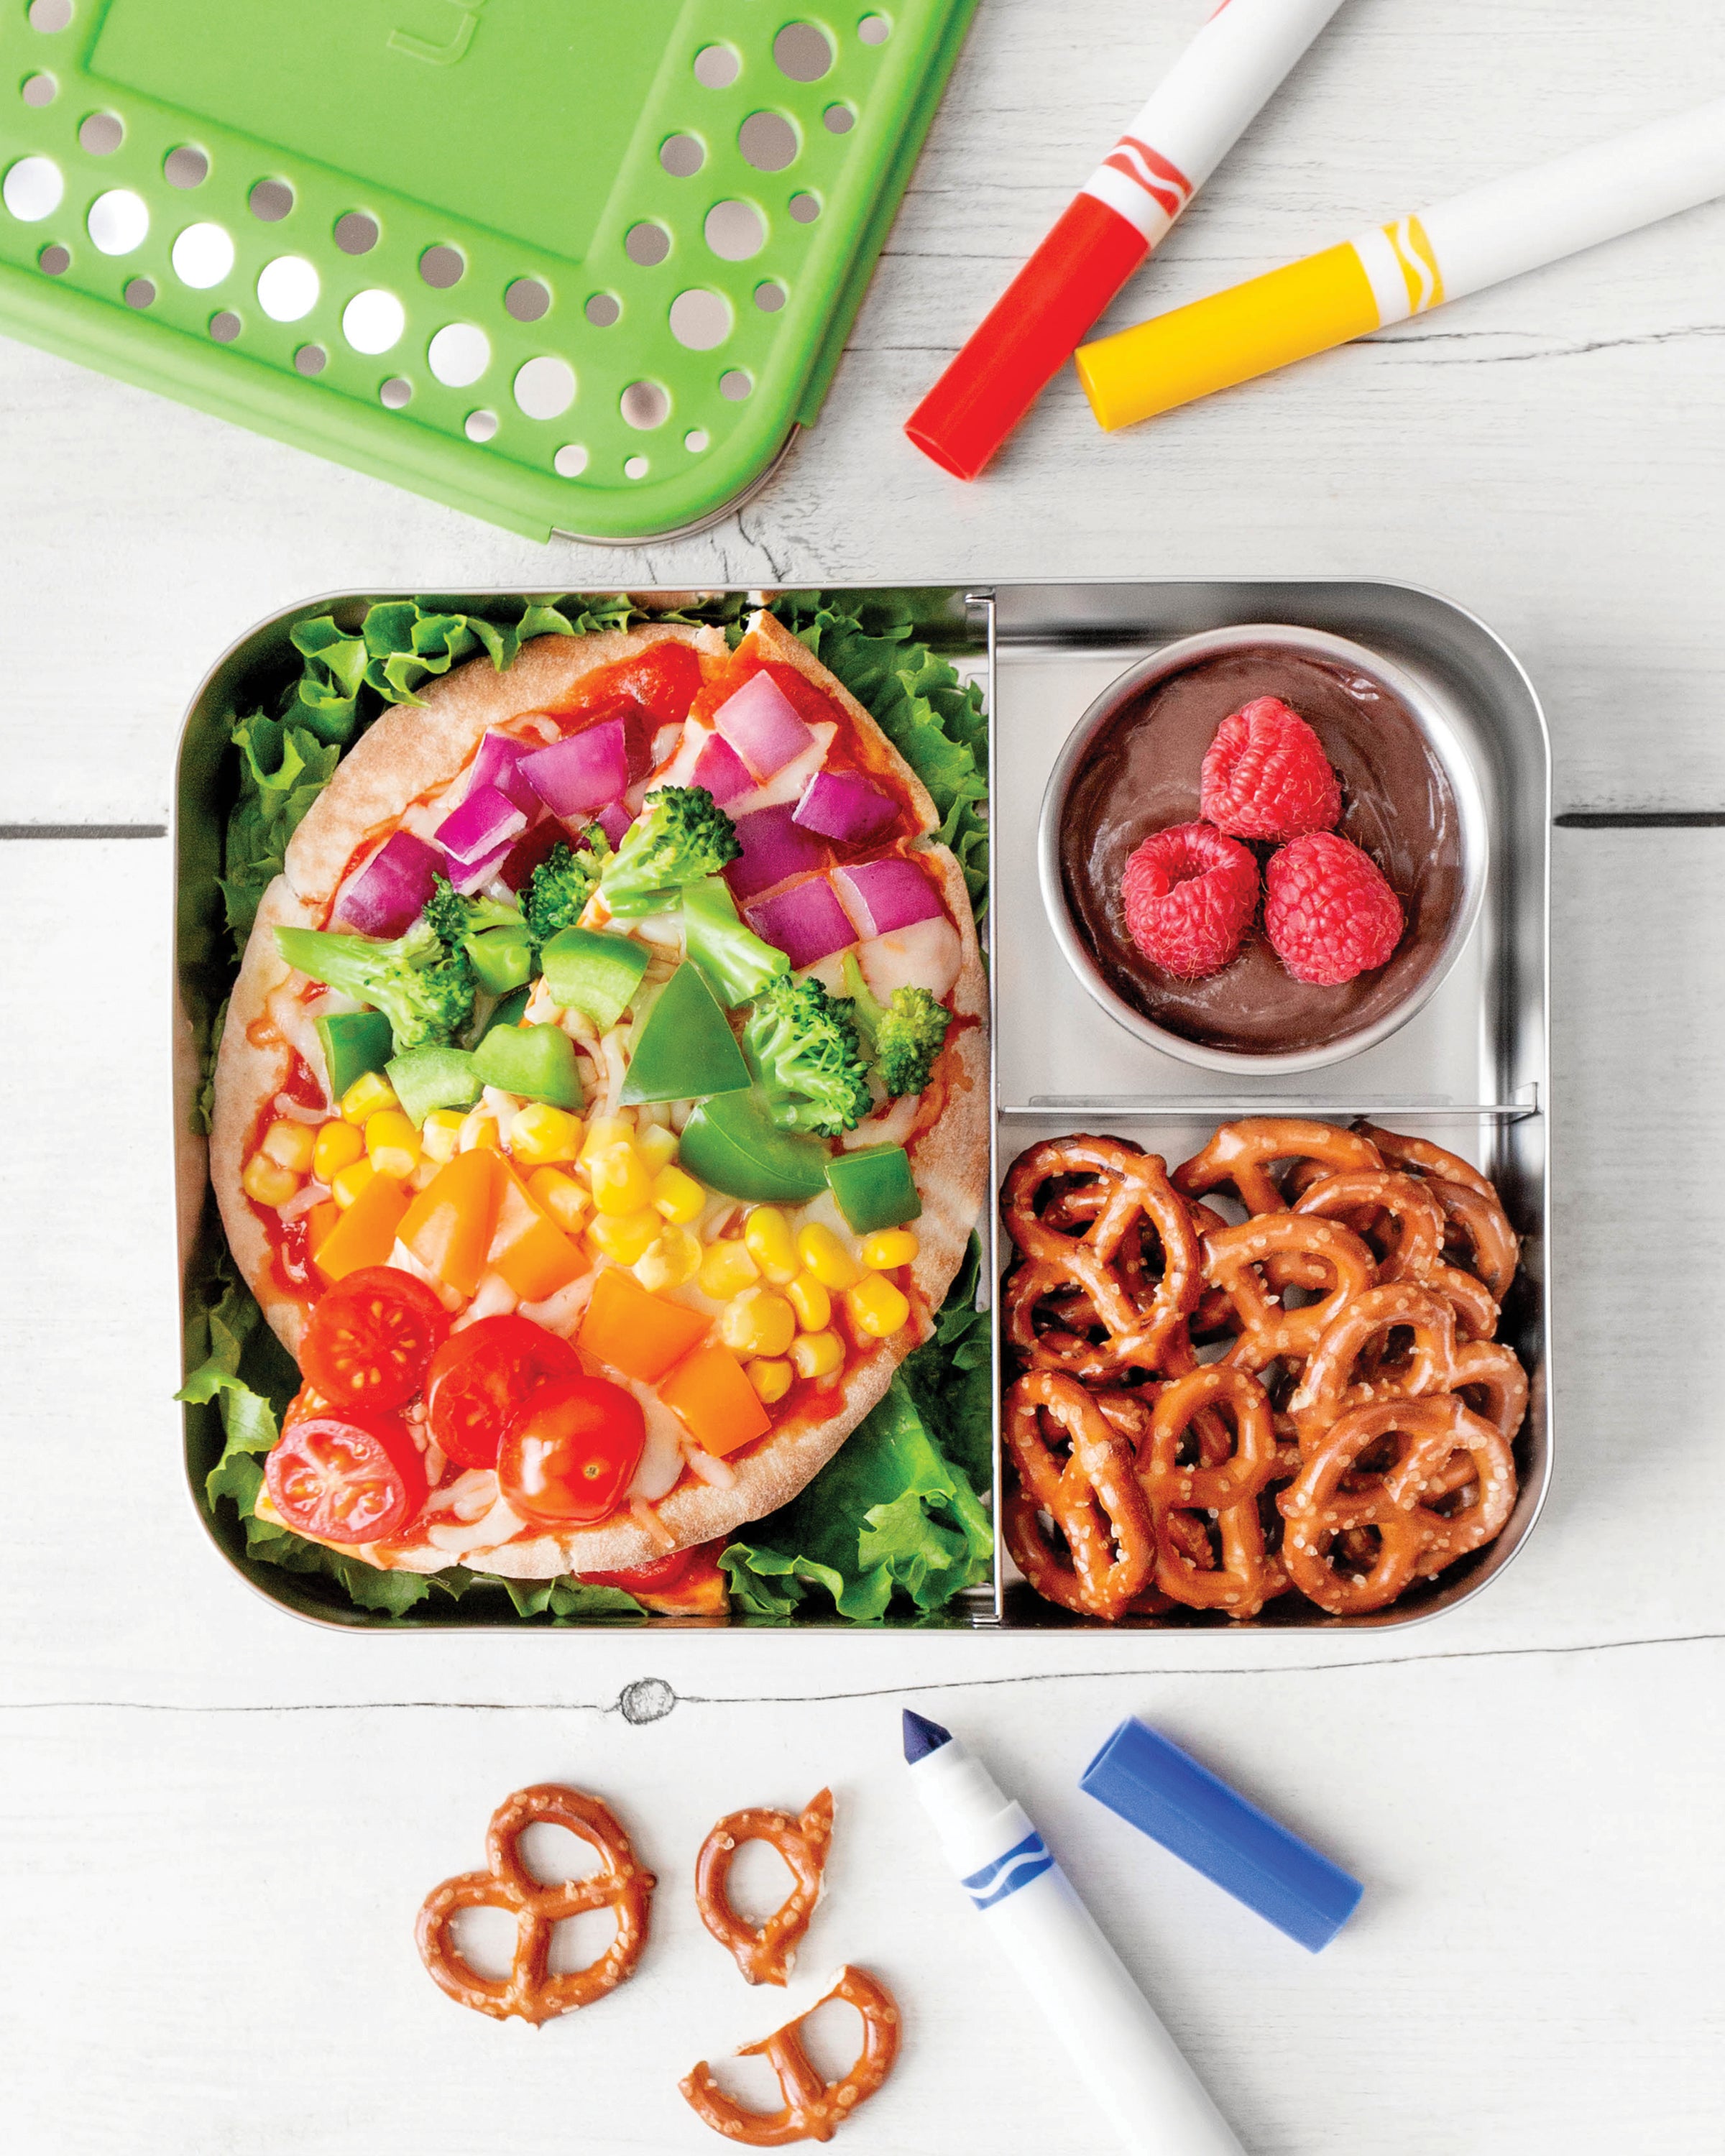 8 bento lunch boxes for kids